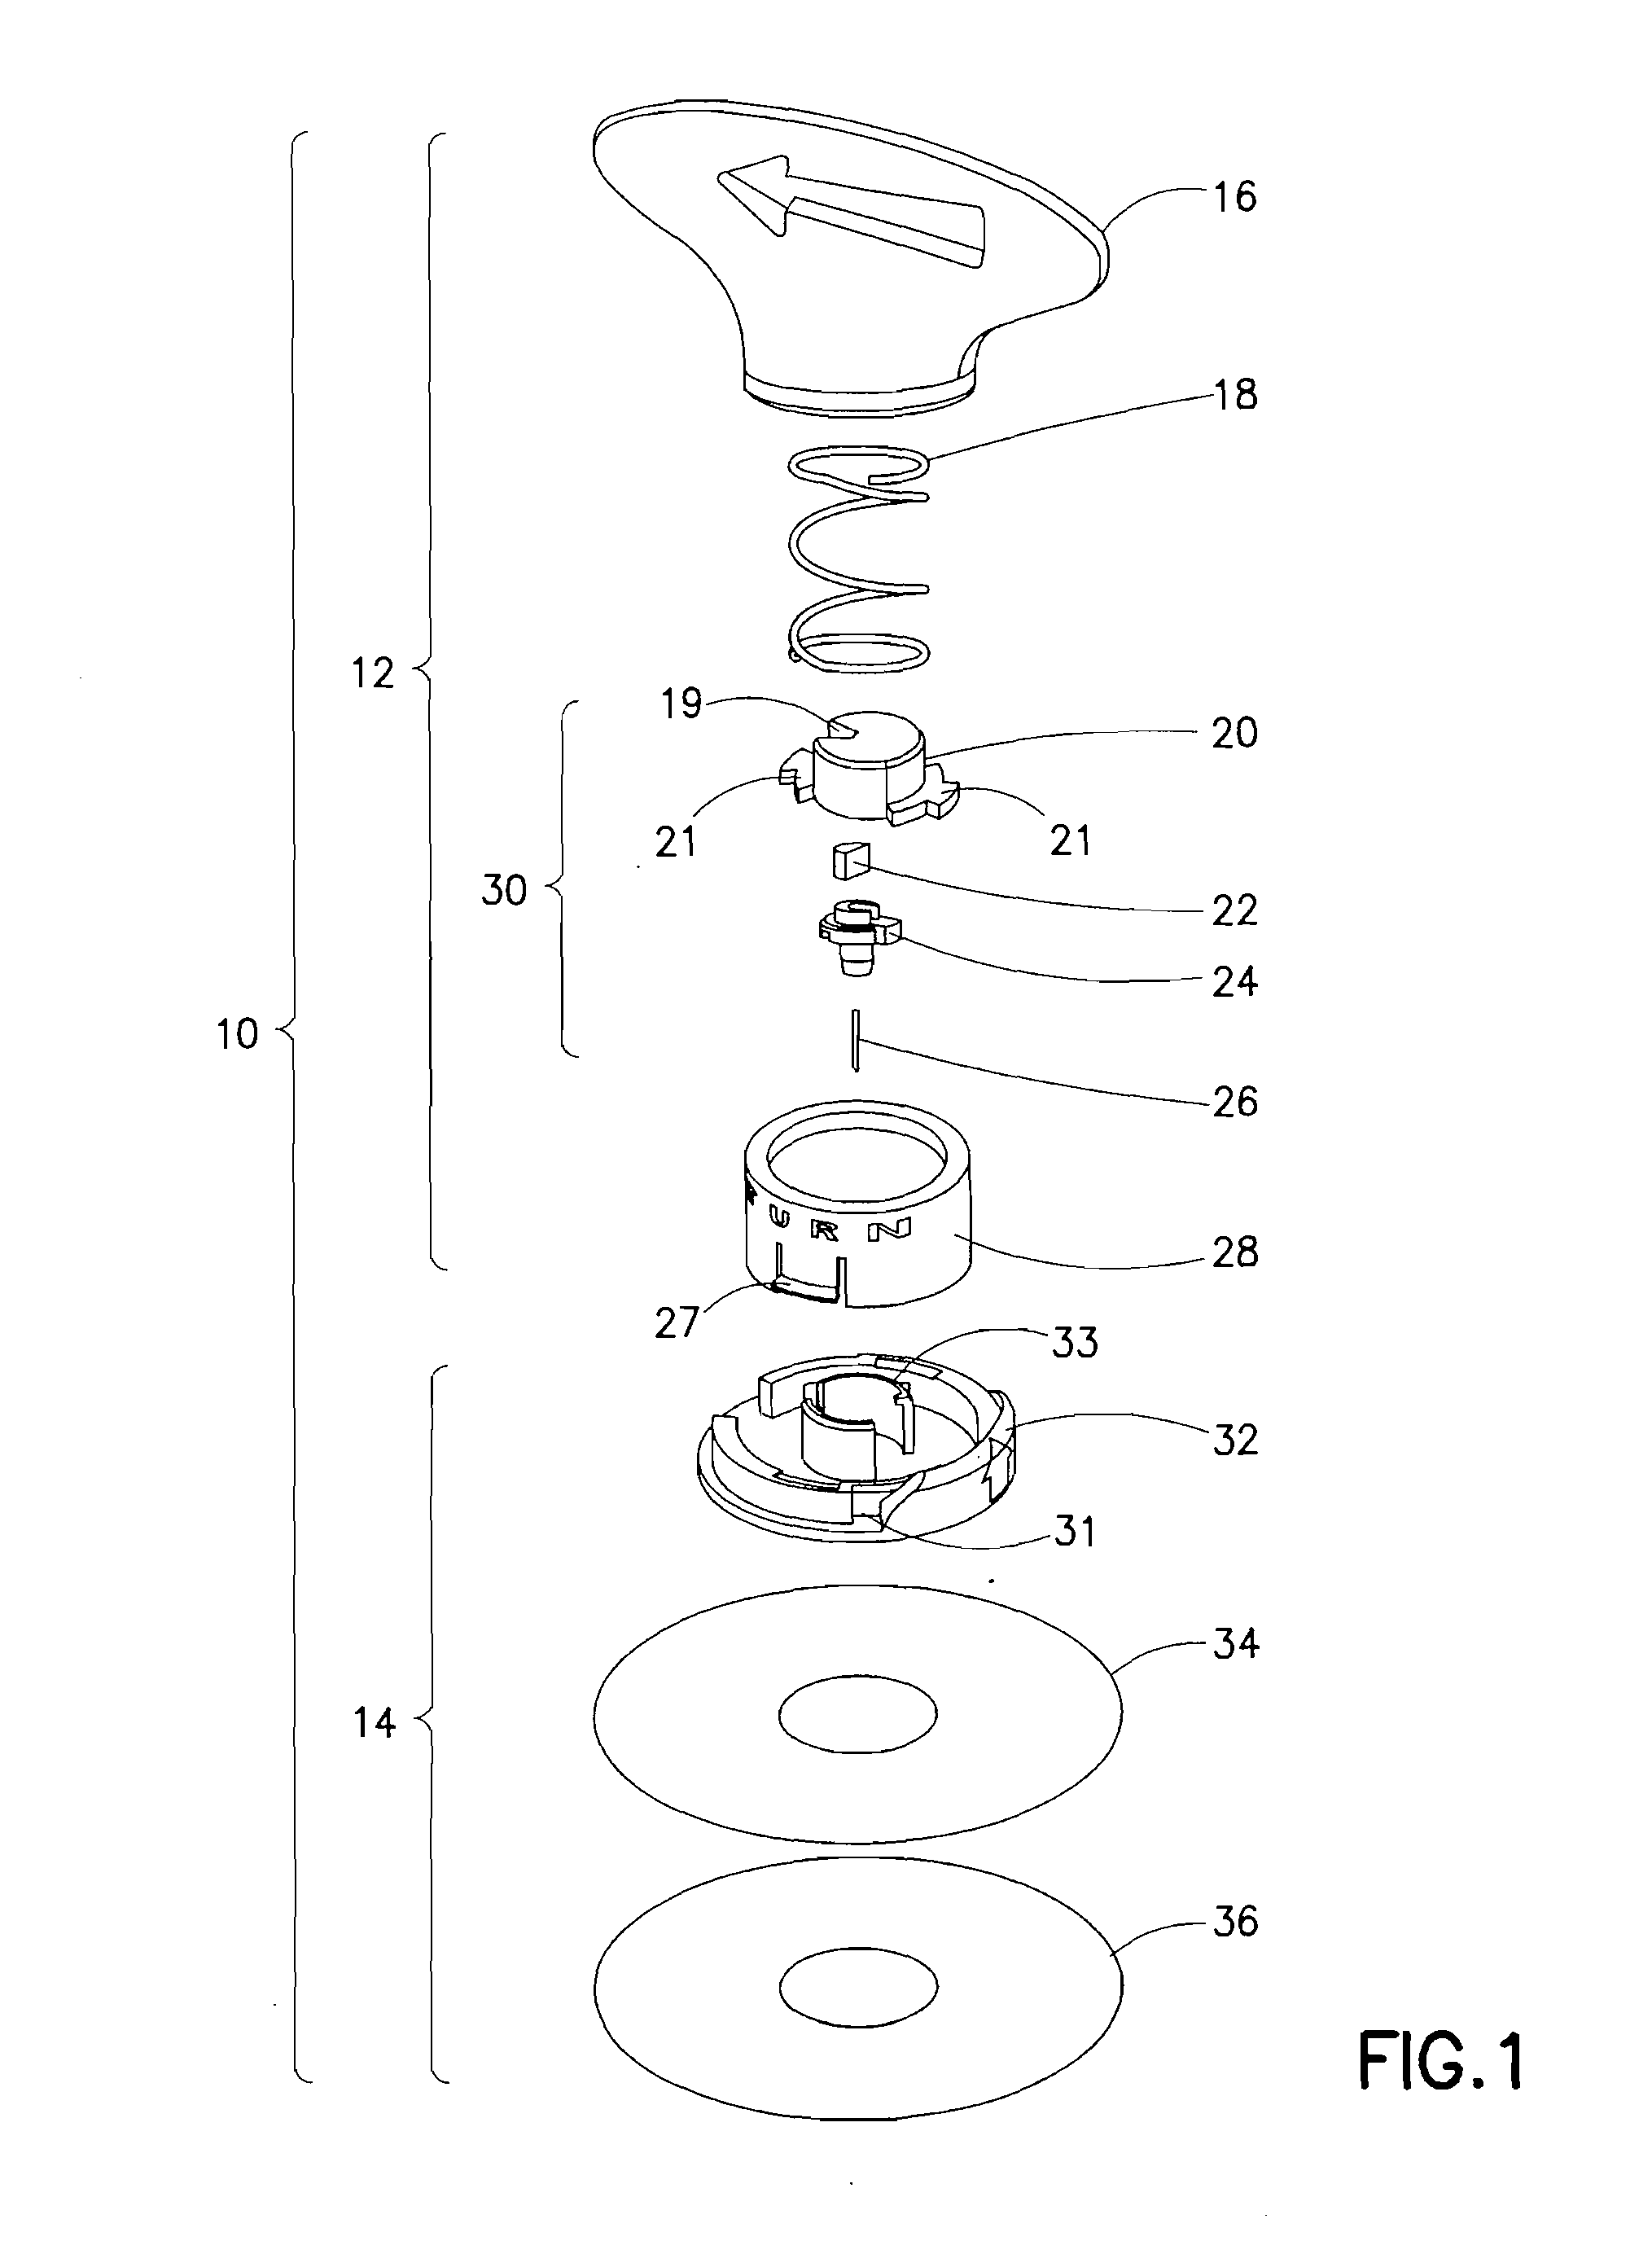 Insulin Pump Dermal Infusion Set Having Partially Integrated Mechanized Cannula Insertion With Disposable Activation Portion